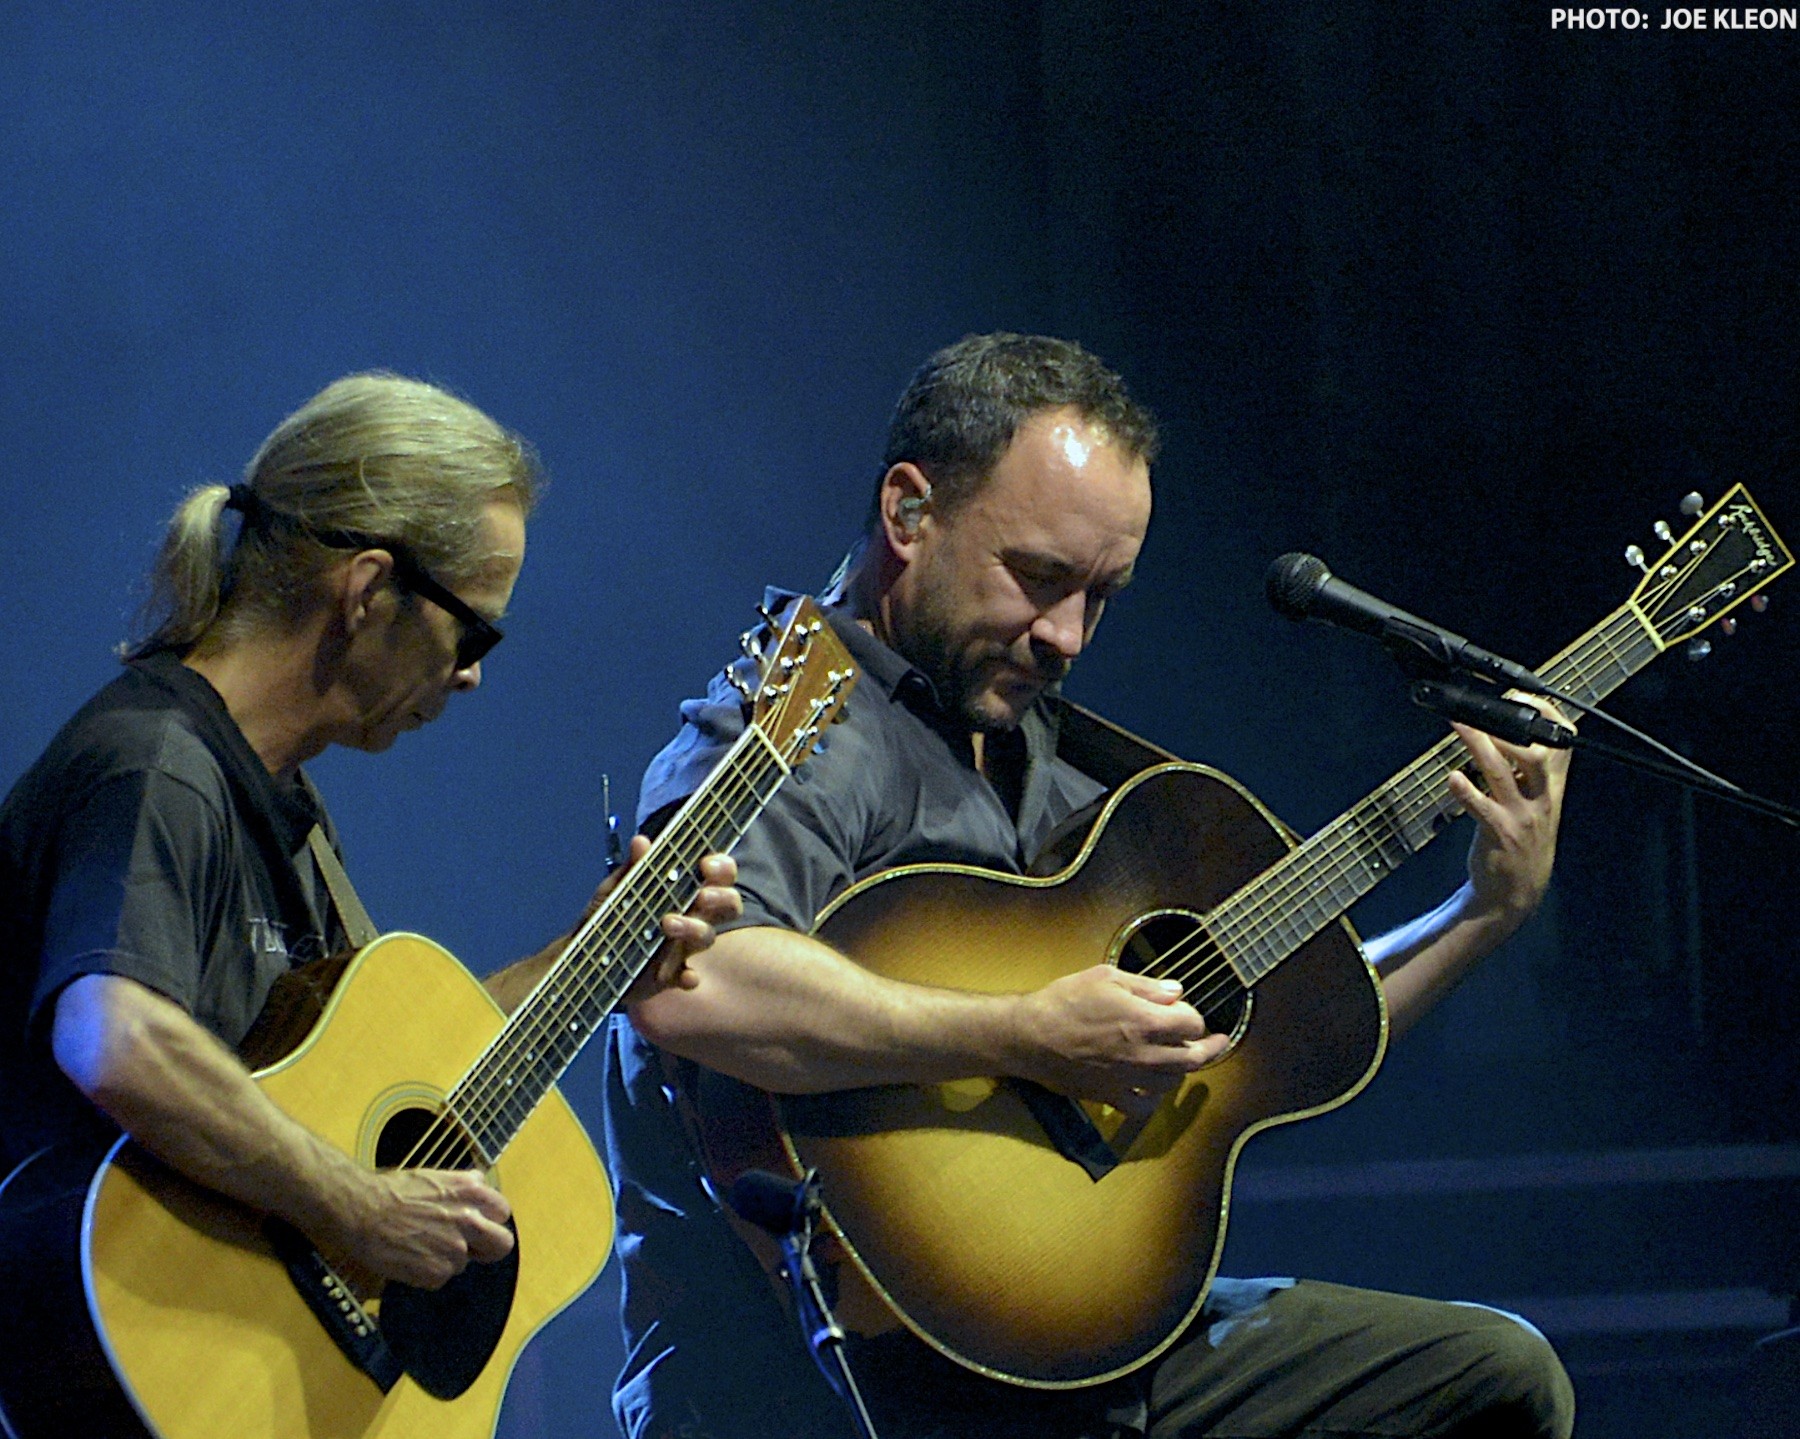 Lykkelig usikre Meget sur Armed Only With Acoustic Guitars, Dave Matthews and Tim Reynolds Turn In an  Epic Set at Blossom | Music News | Cleveland | Cleveland Scene